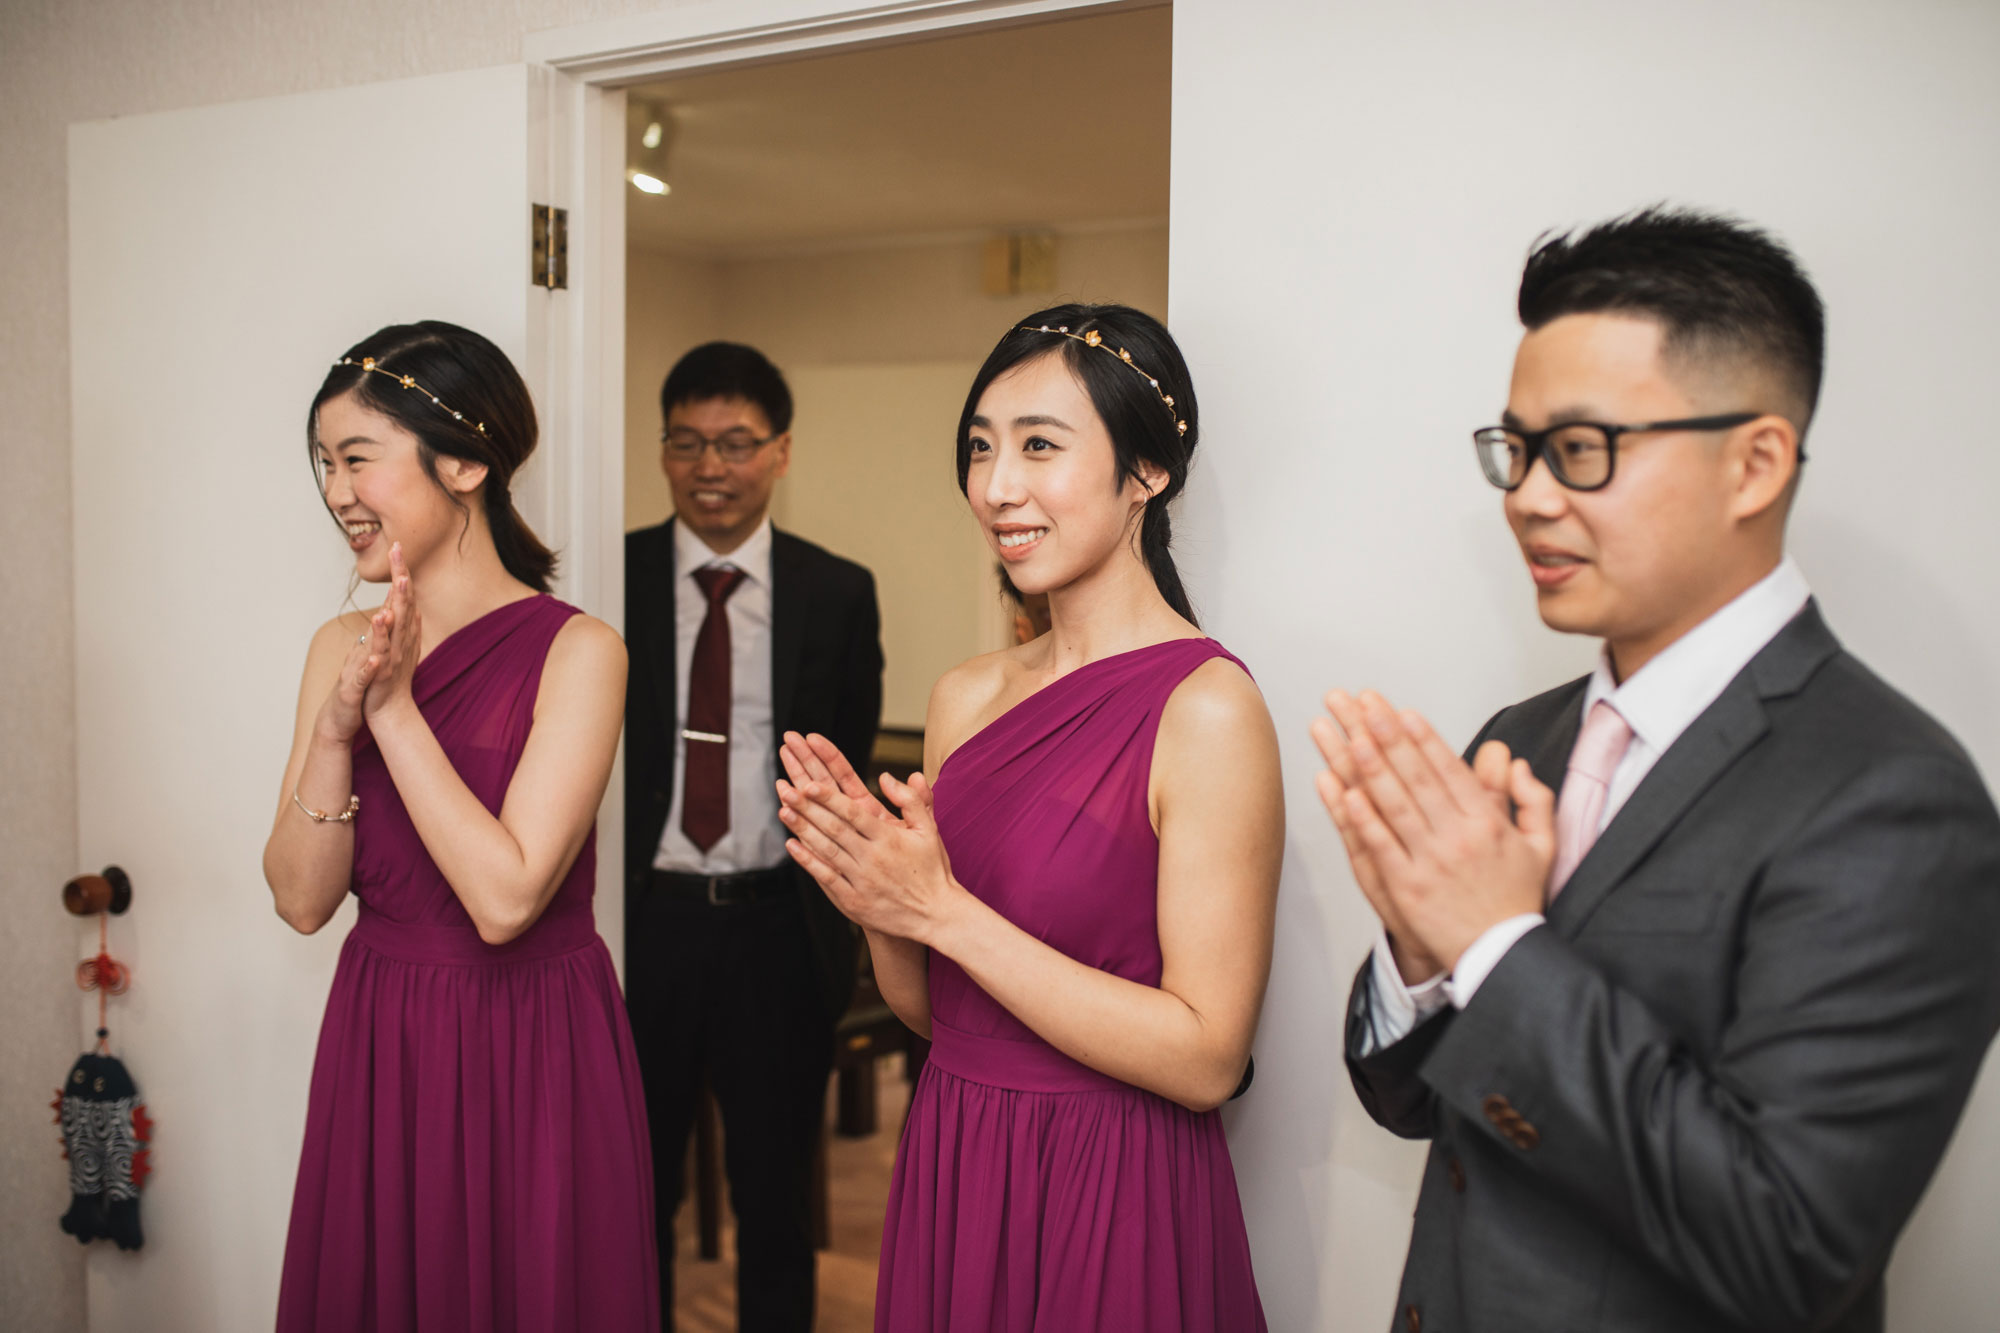 wedding party clapping